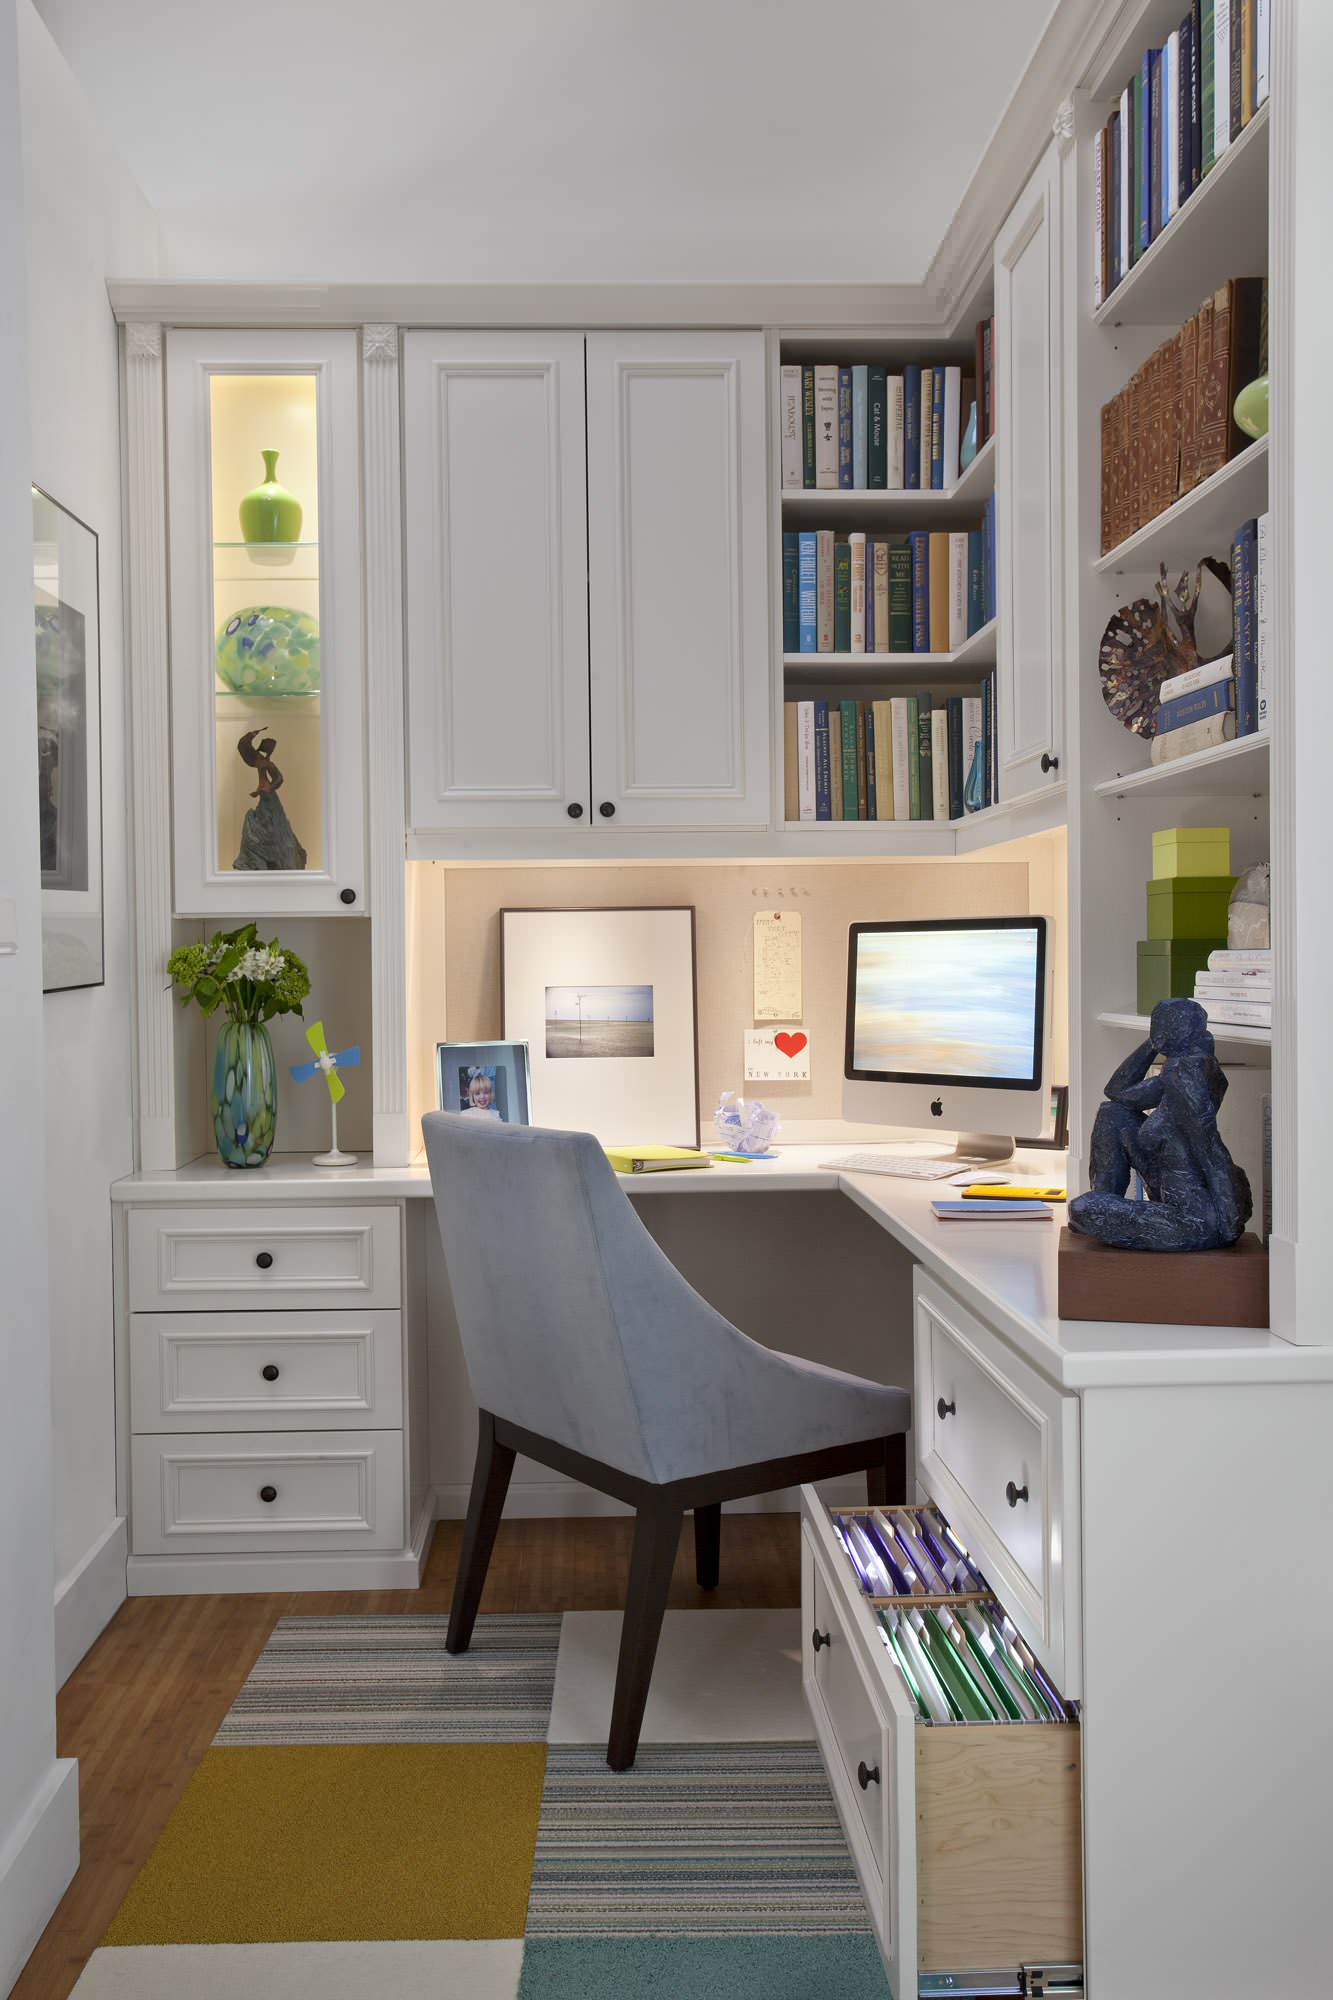 https://st.hzcdn.com/simgs/pictures/home-offices/painted-maple-corner-office-armonk-ny-transform-home-img~d551ed4d0fad58ad_14-5983-1-7fe036d.jpg